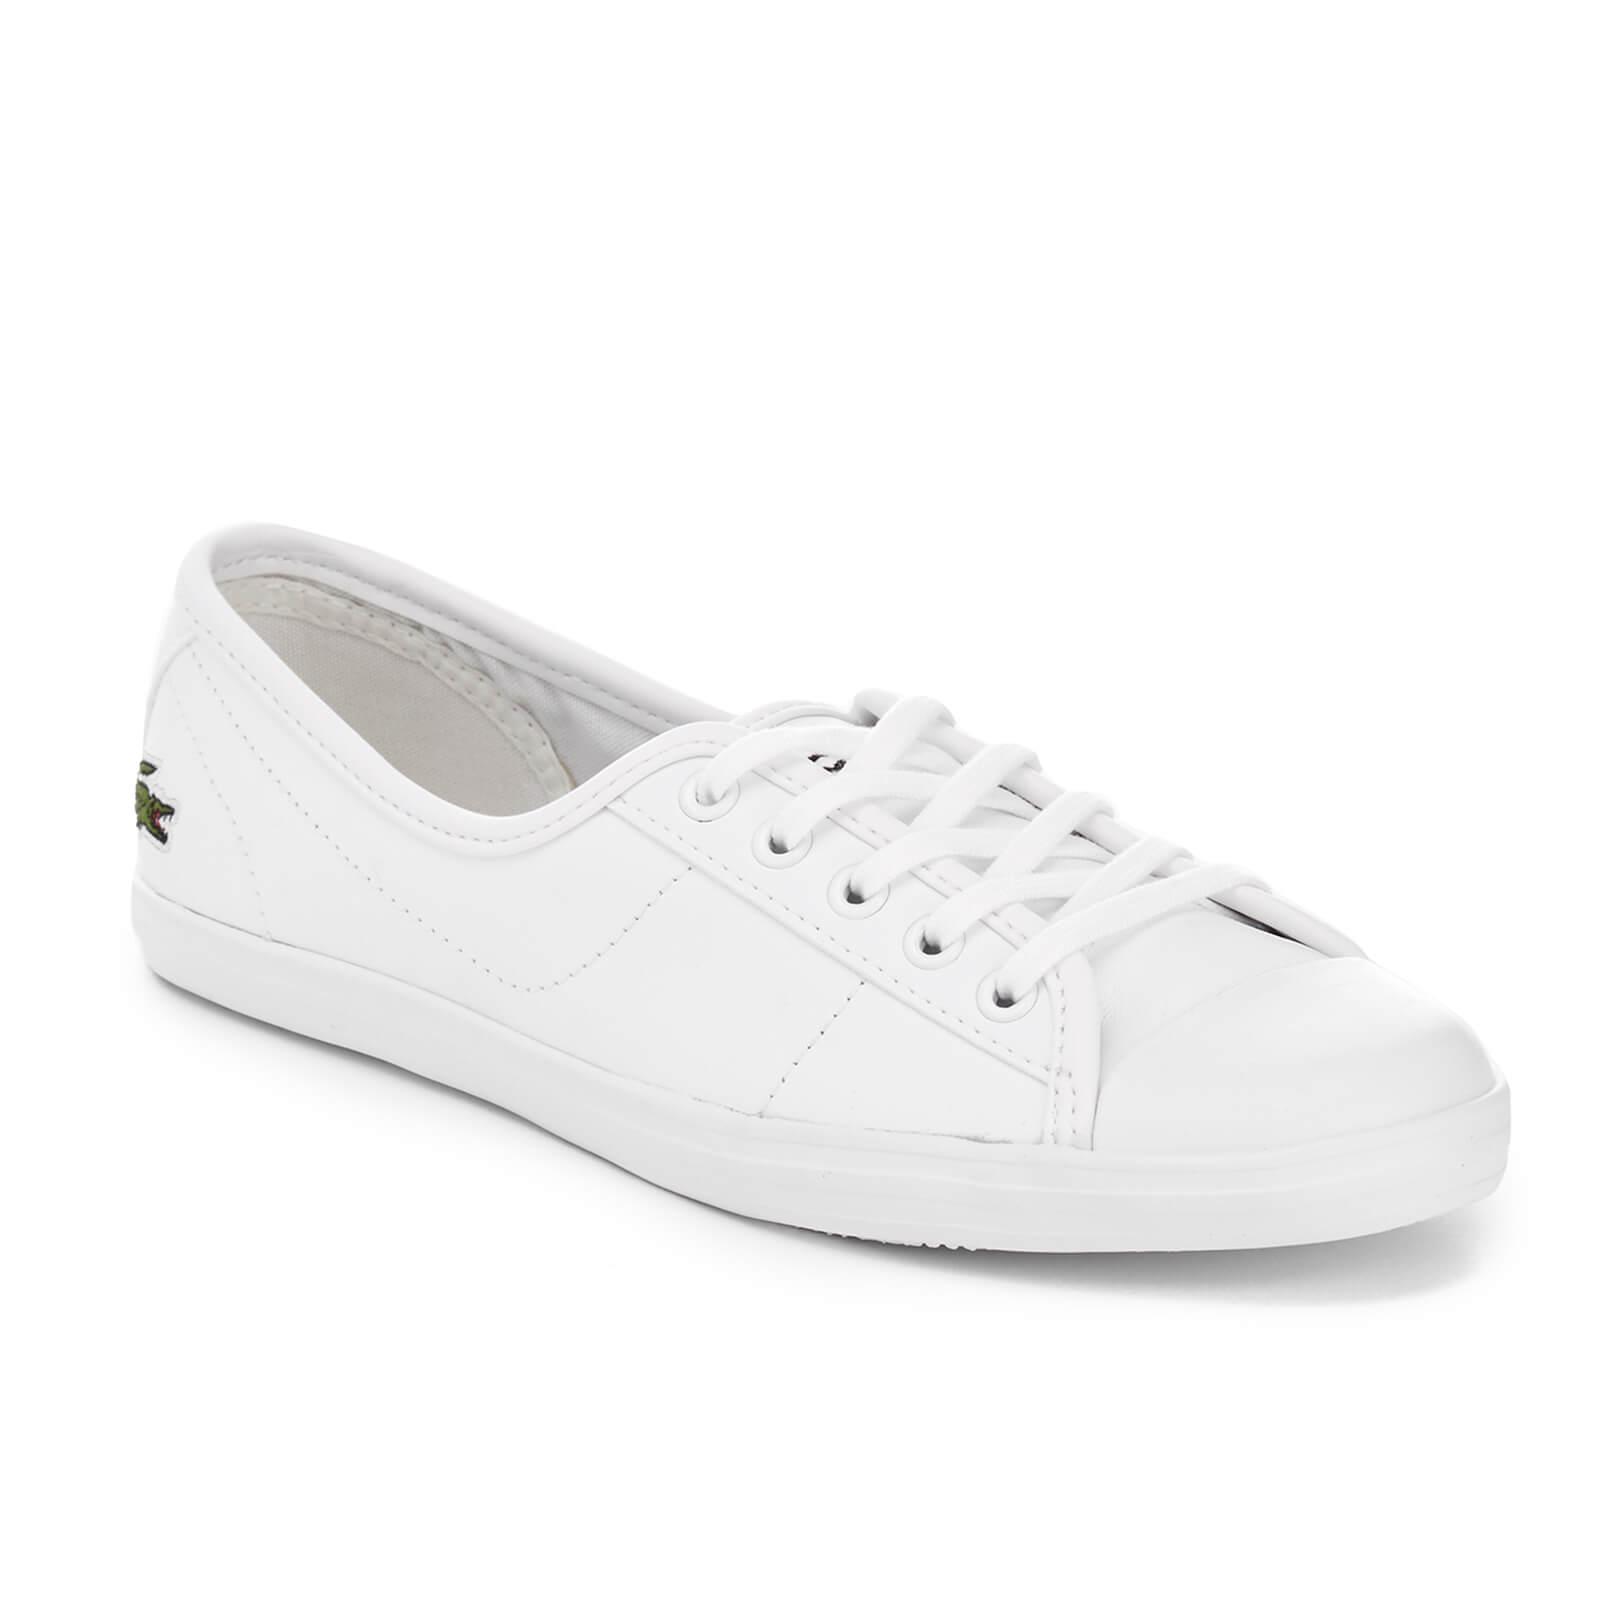 LACOSTE Womens Ziane Chunky Plimsolls Trainers White 